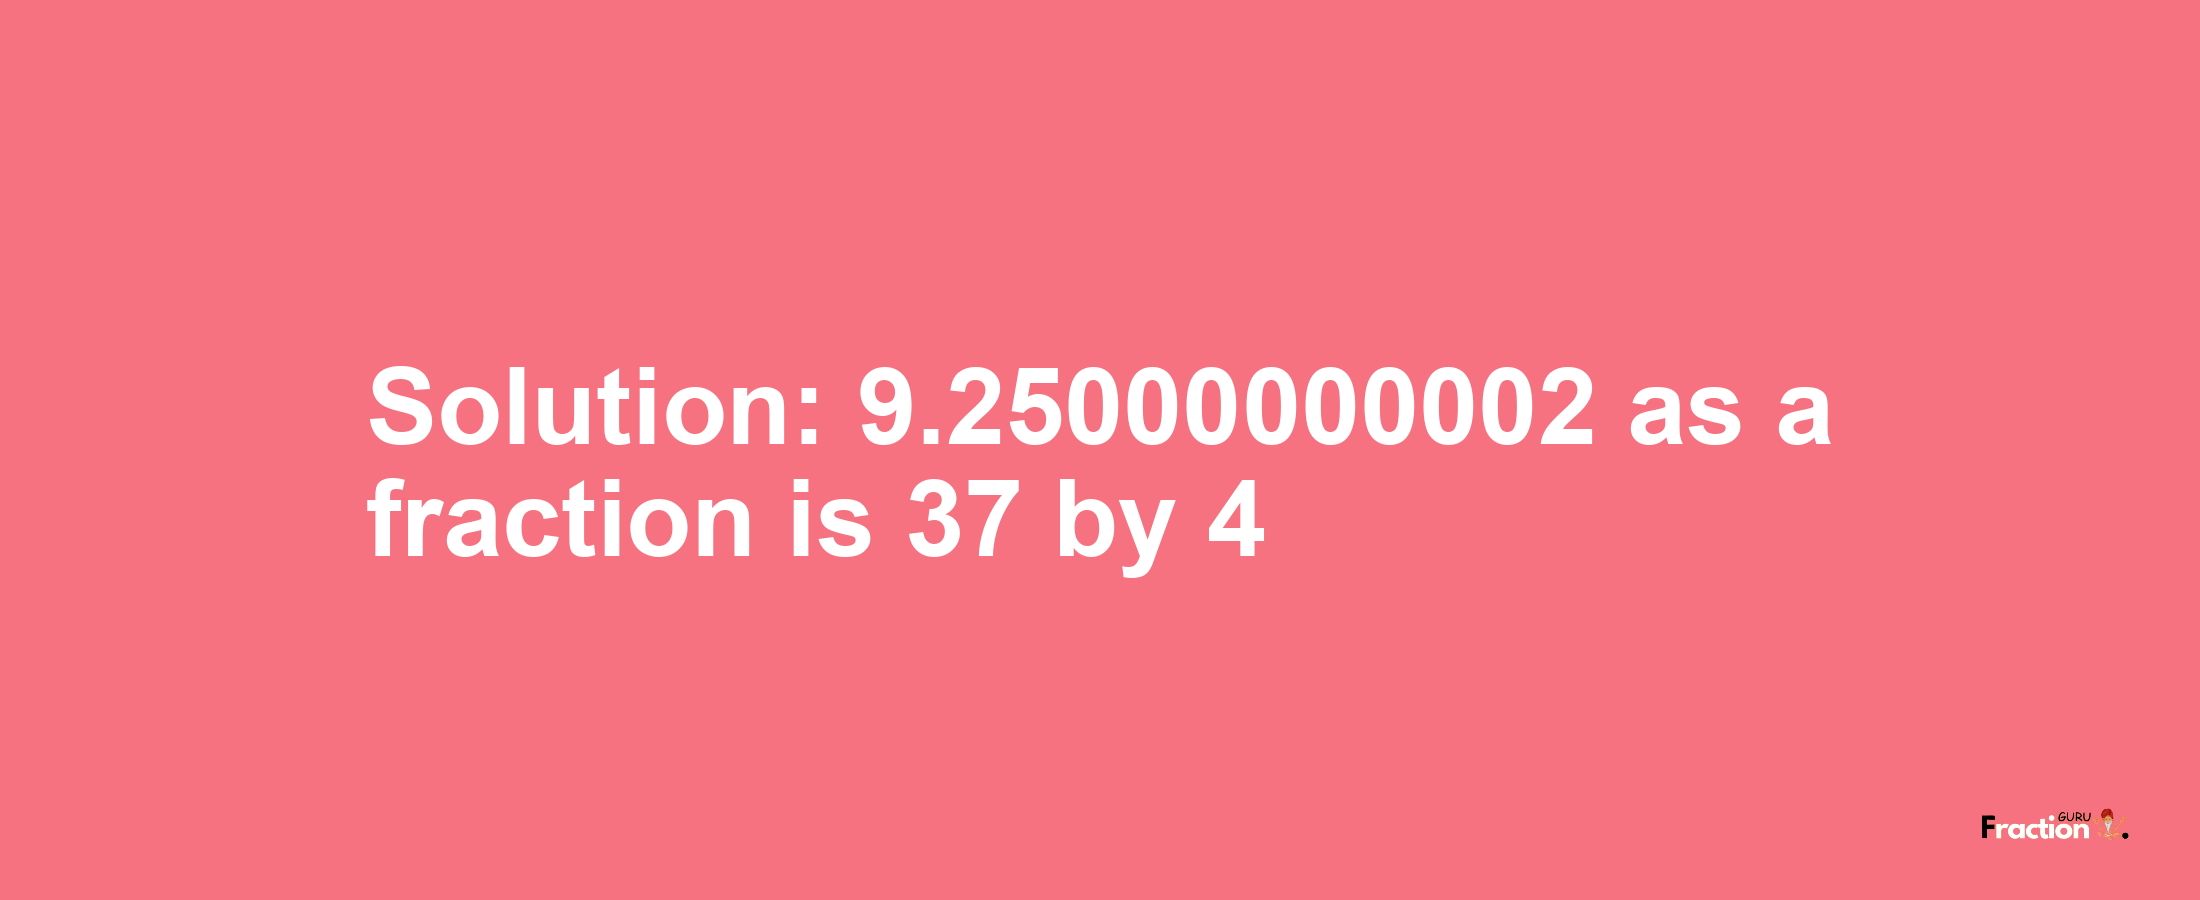 Solution:9.25000000002 as a fraction is 37/4